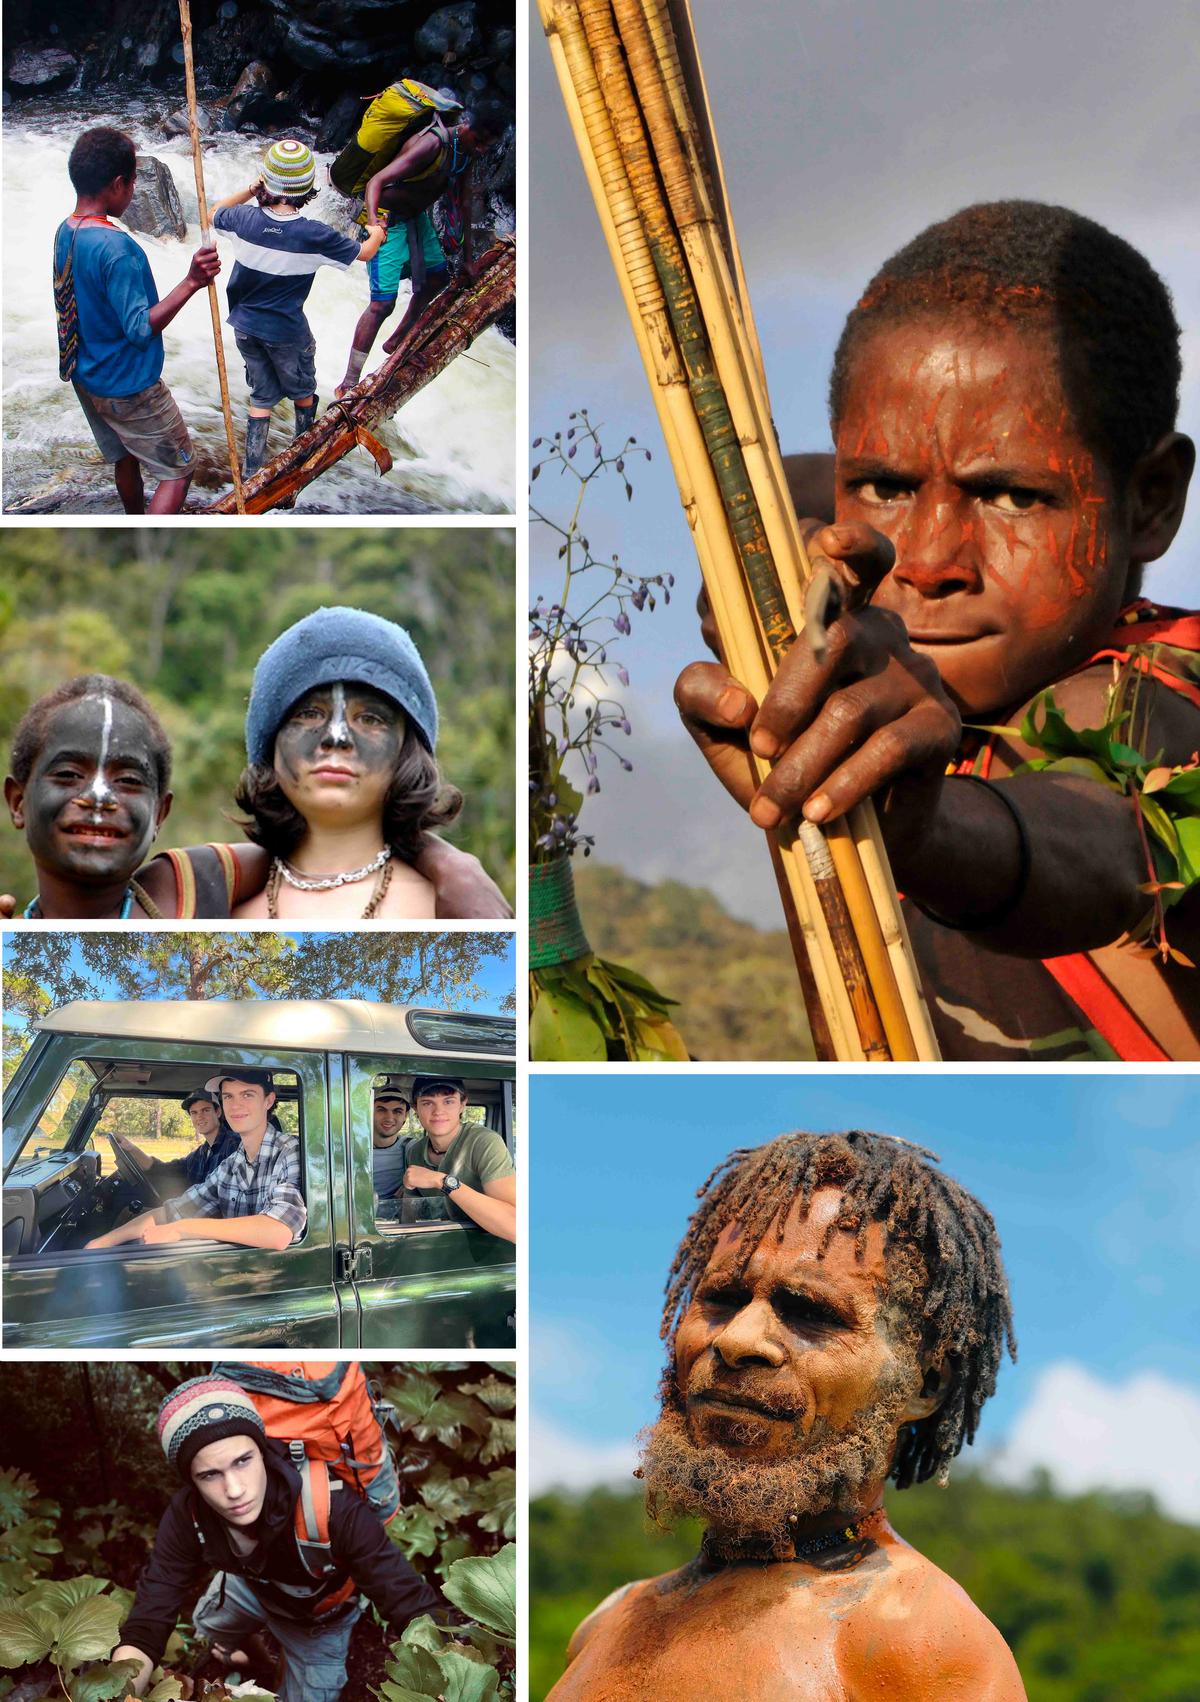 A collage of the Wild brothers and the Wano people in the jungles of Papua, Indonesia, over the course of over a decade. (Courtesy of <a href="https://www.wildbrothersproductions.com/off-the-couch-into-creation">The Wild Brothers</a>)